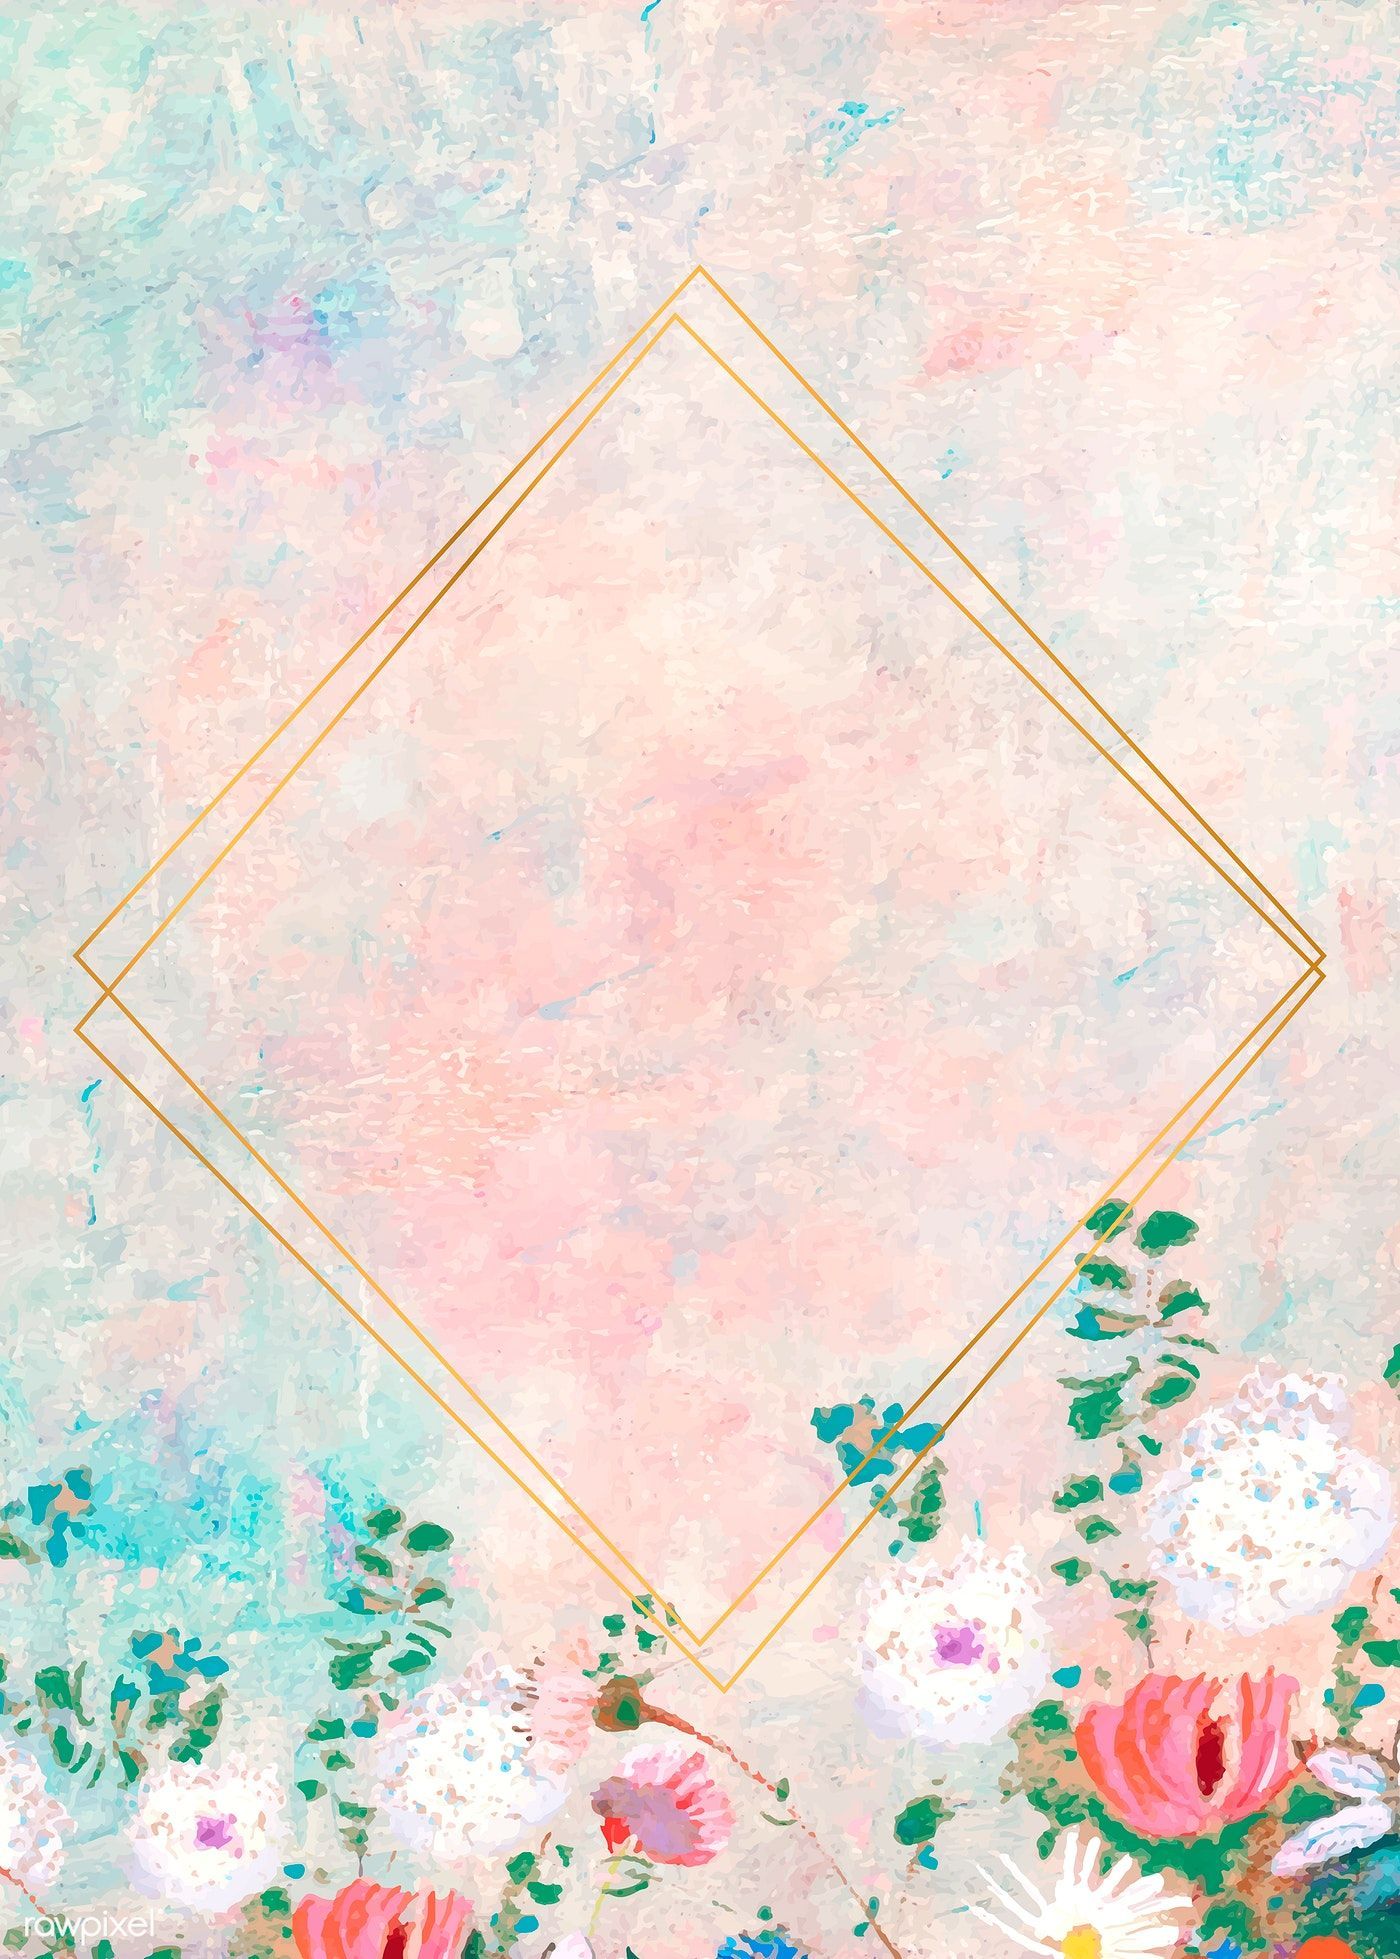 Download premium vector of Gold rhombus frame on pastel background